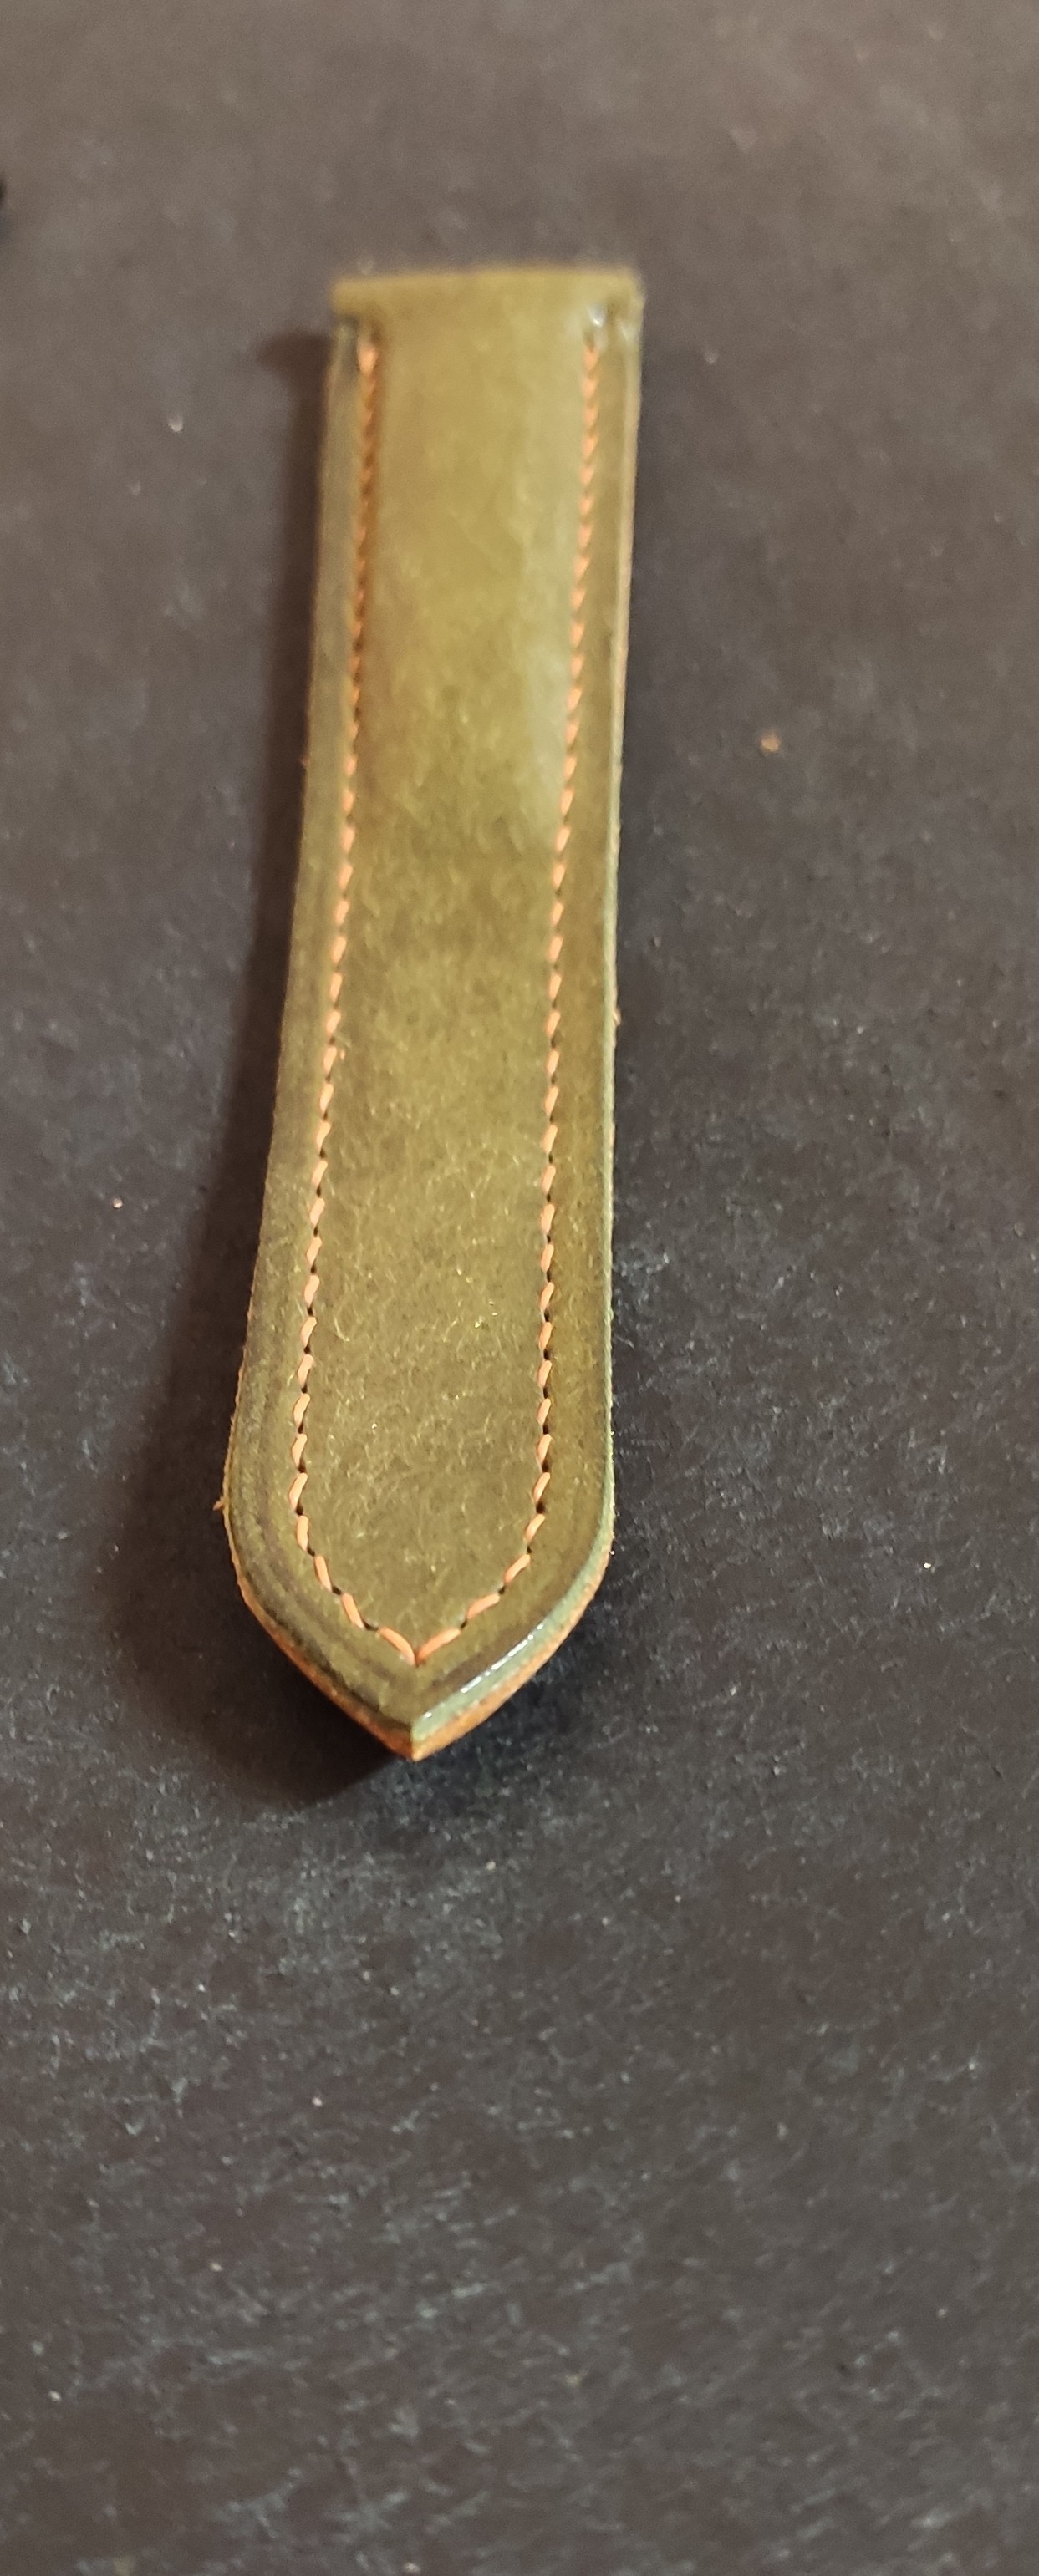 My leather works - Handmade, Natural leather, Longpost